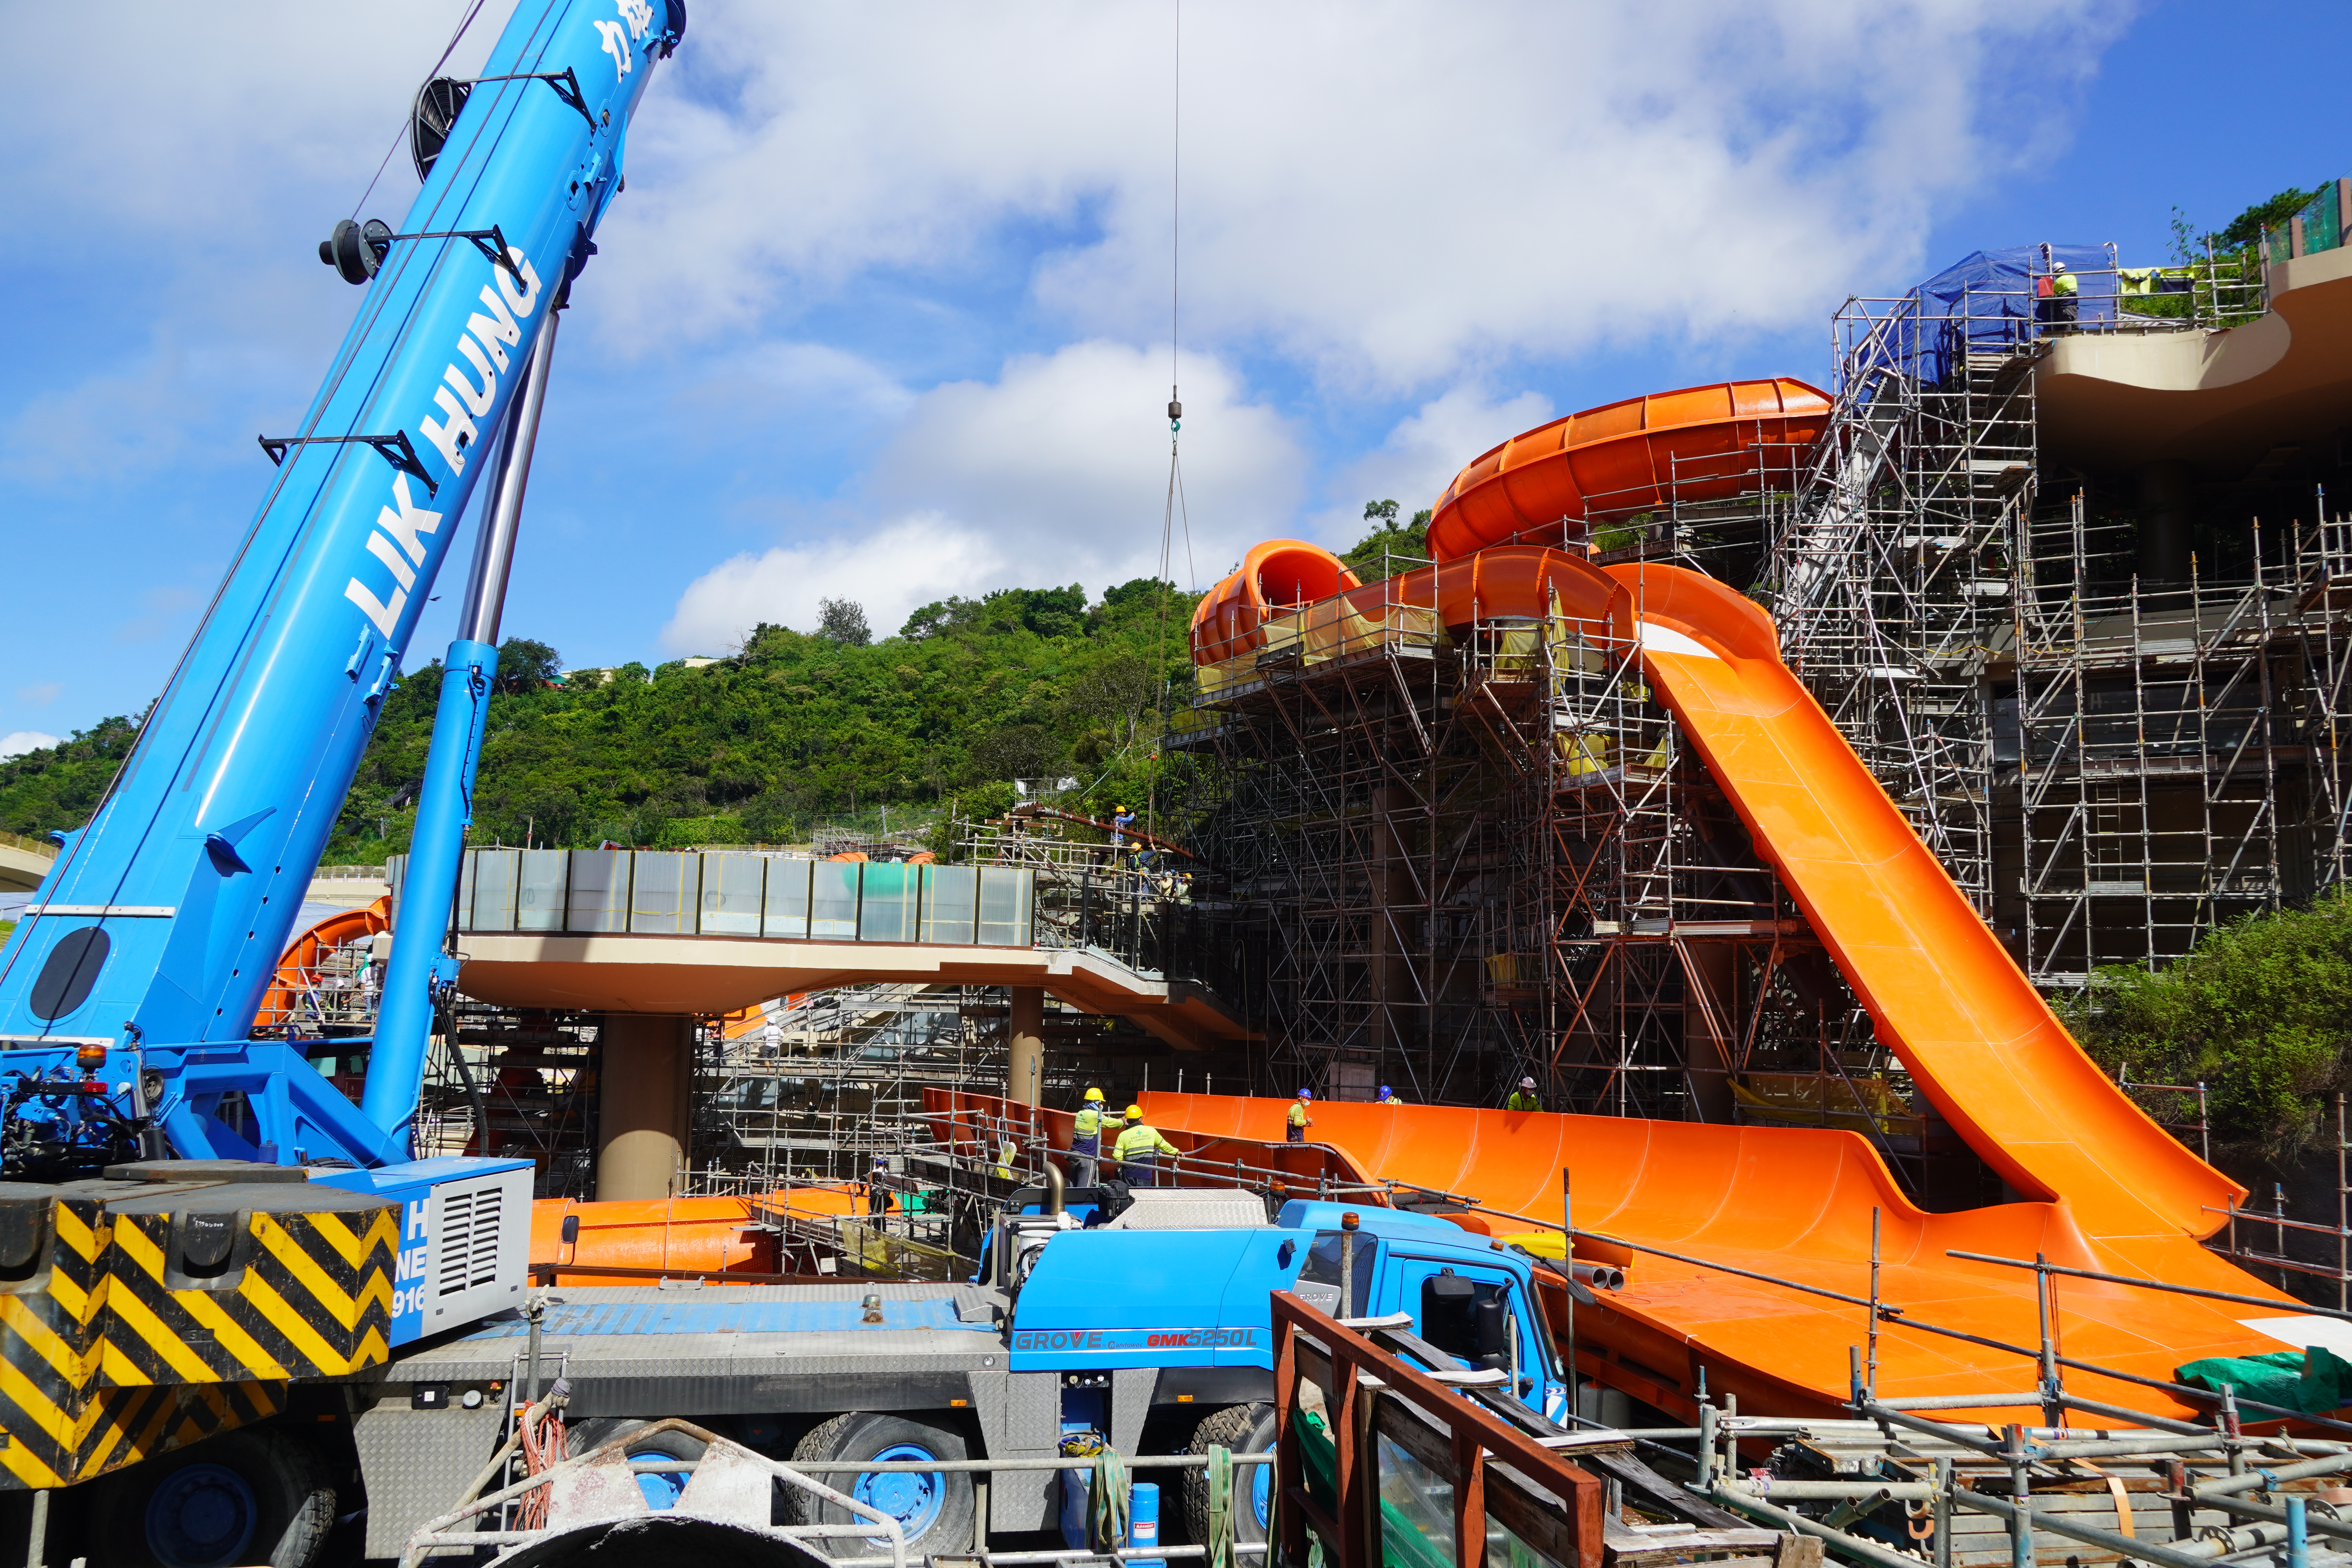 Ride Installtion for Ride P1,P2,P3, Play Structures and Wave Surfer for Ocean park Tai Shue Wan Water World Project